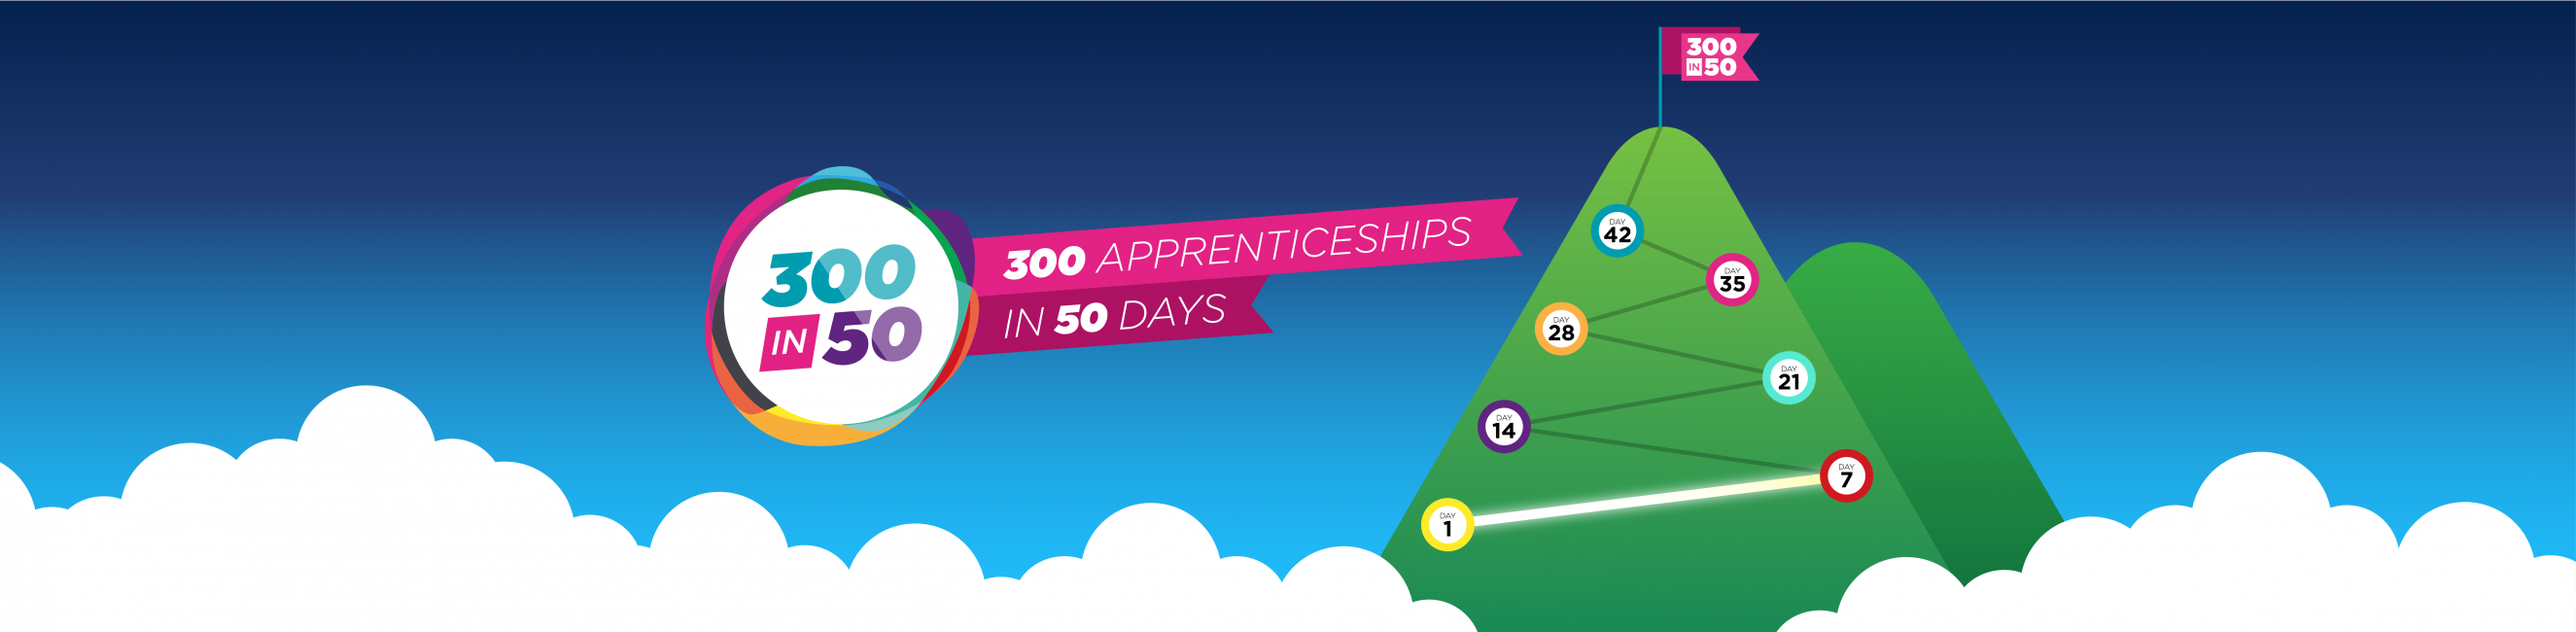 300 apprentices in 50 days graphic 